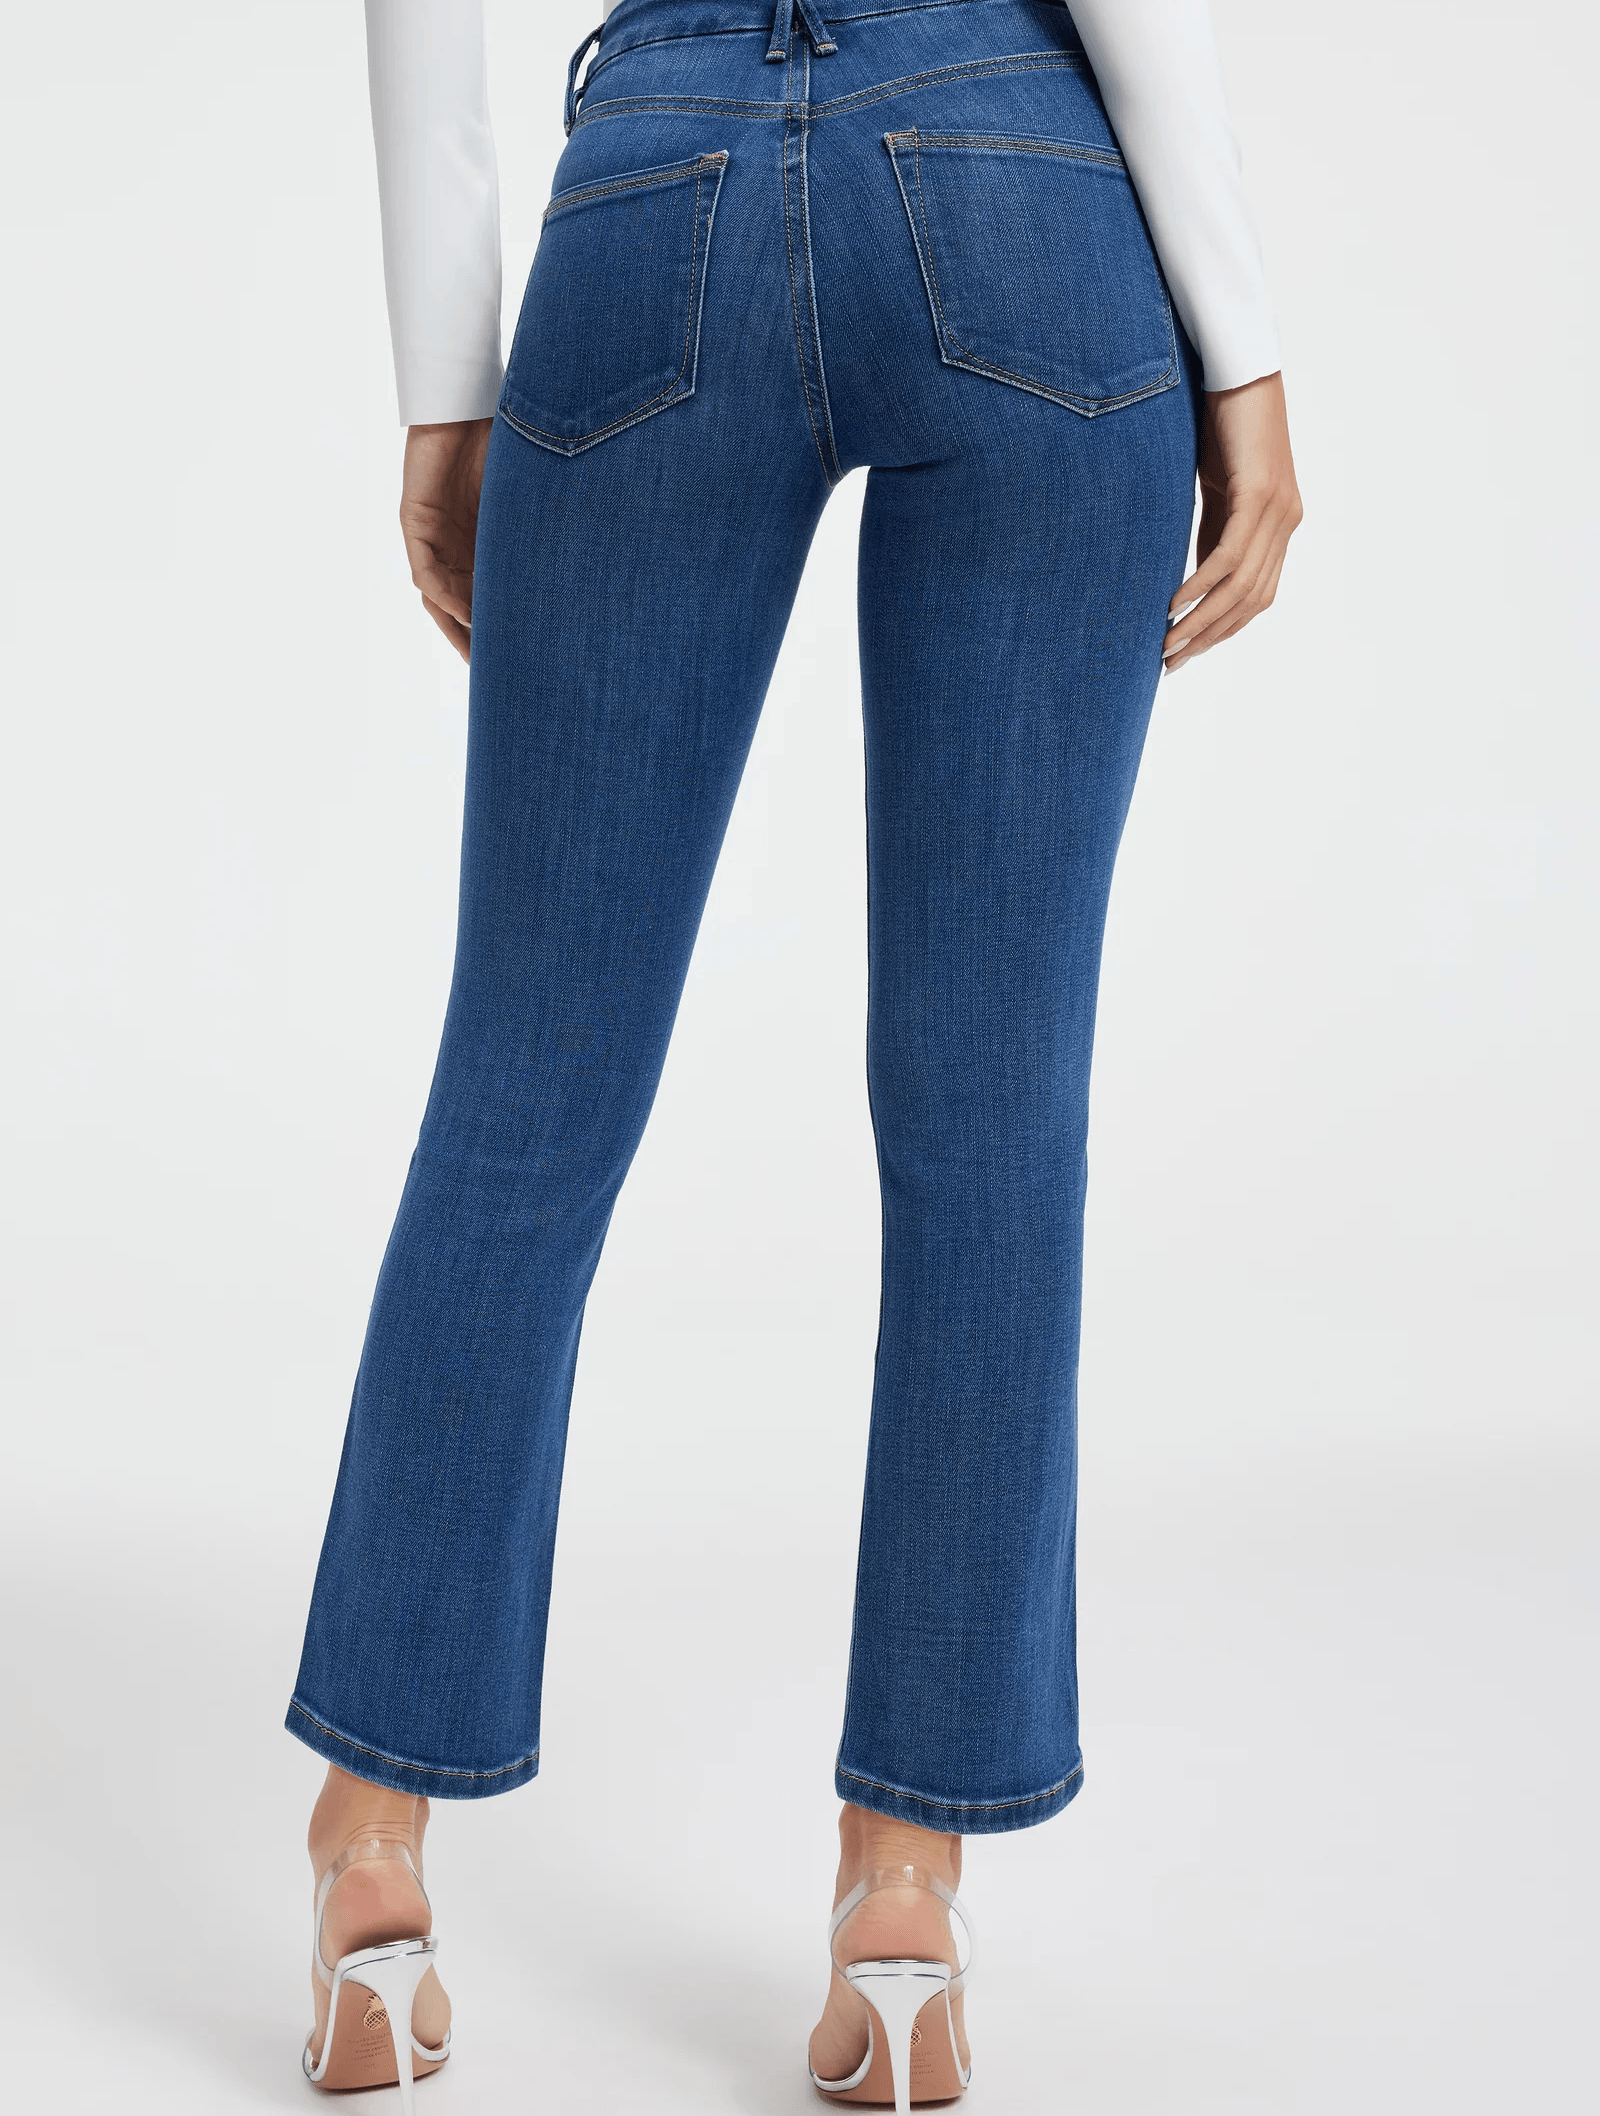 Good Legs Straight Jeans - Fox Trot Boutique